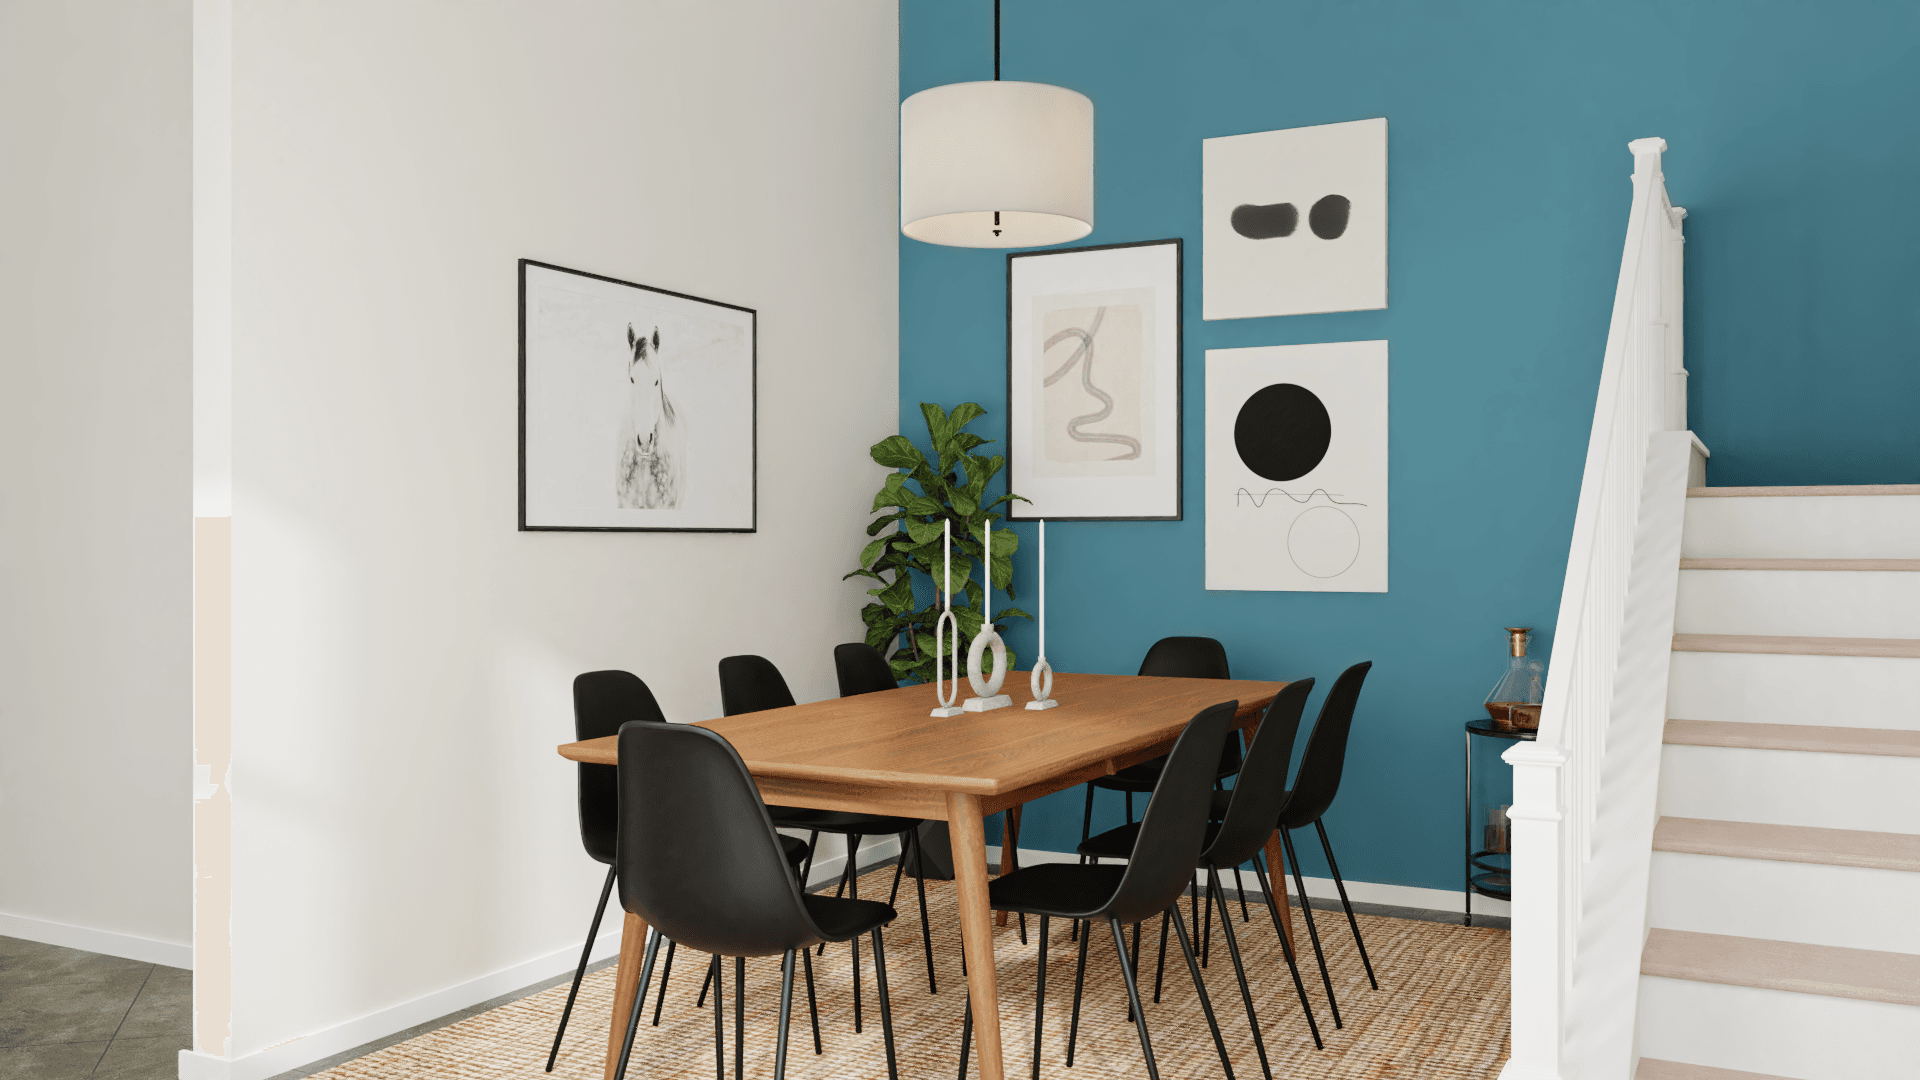 A Mid-Century Dining Room In A Pretty Blue Hue